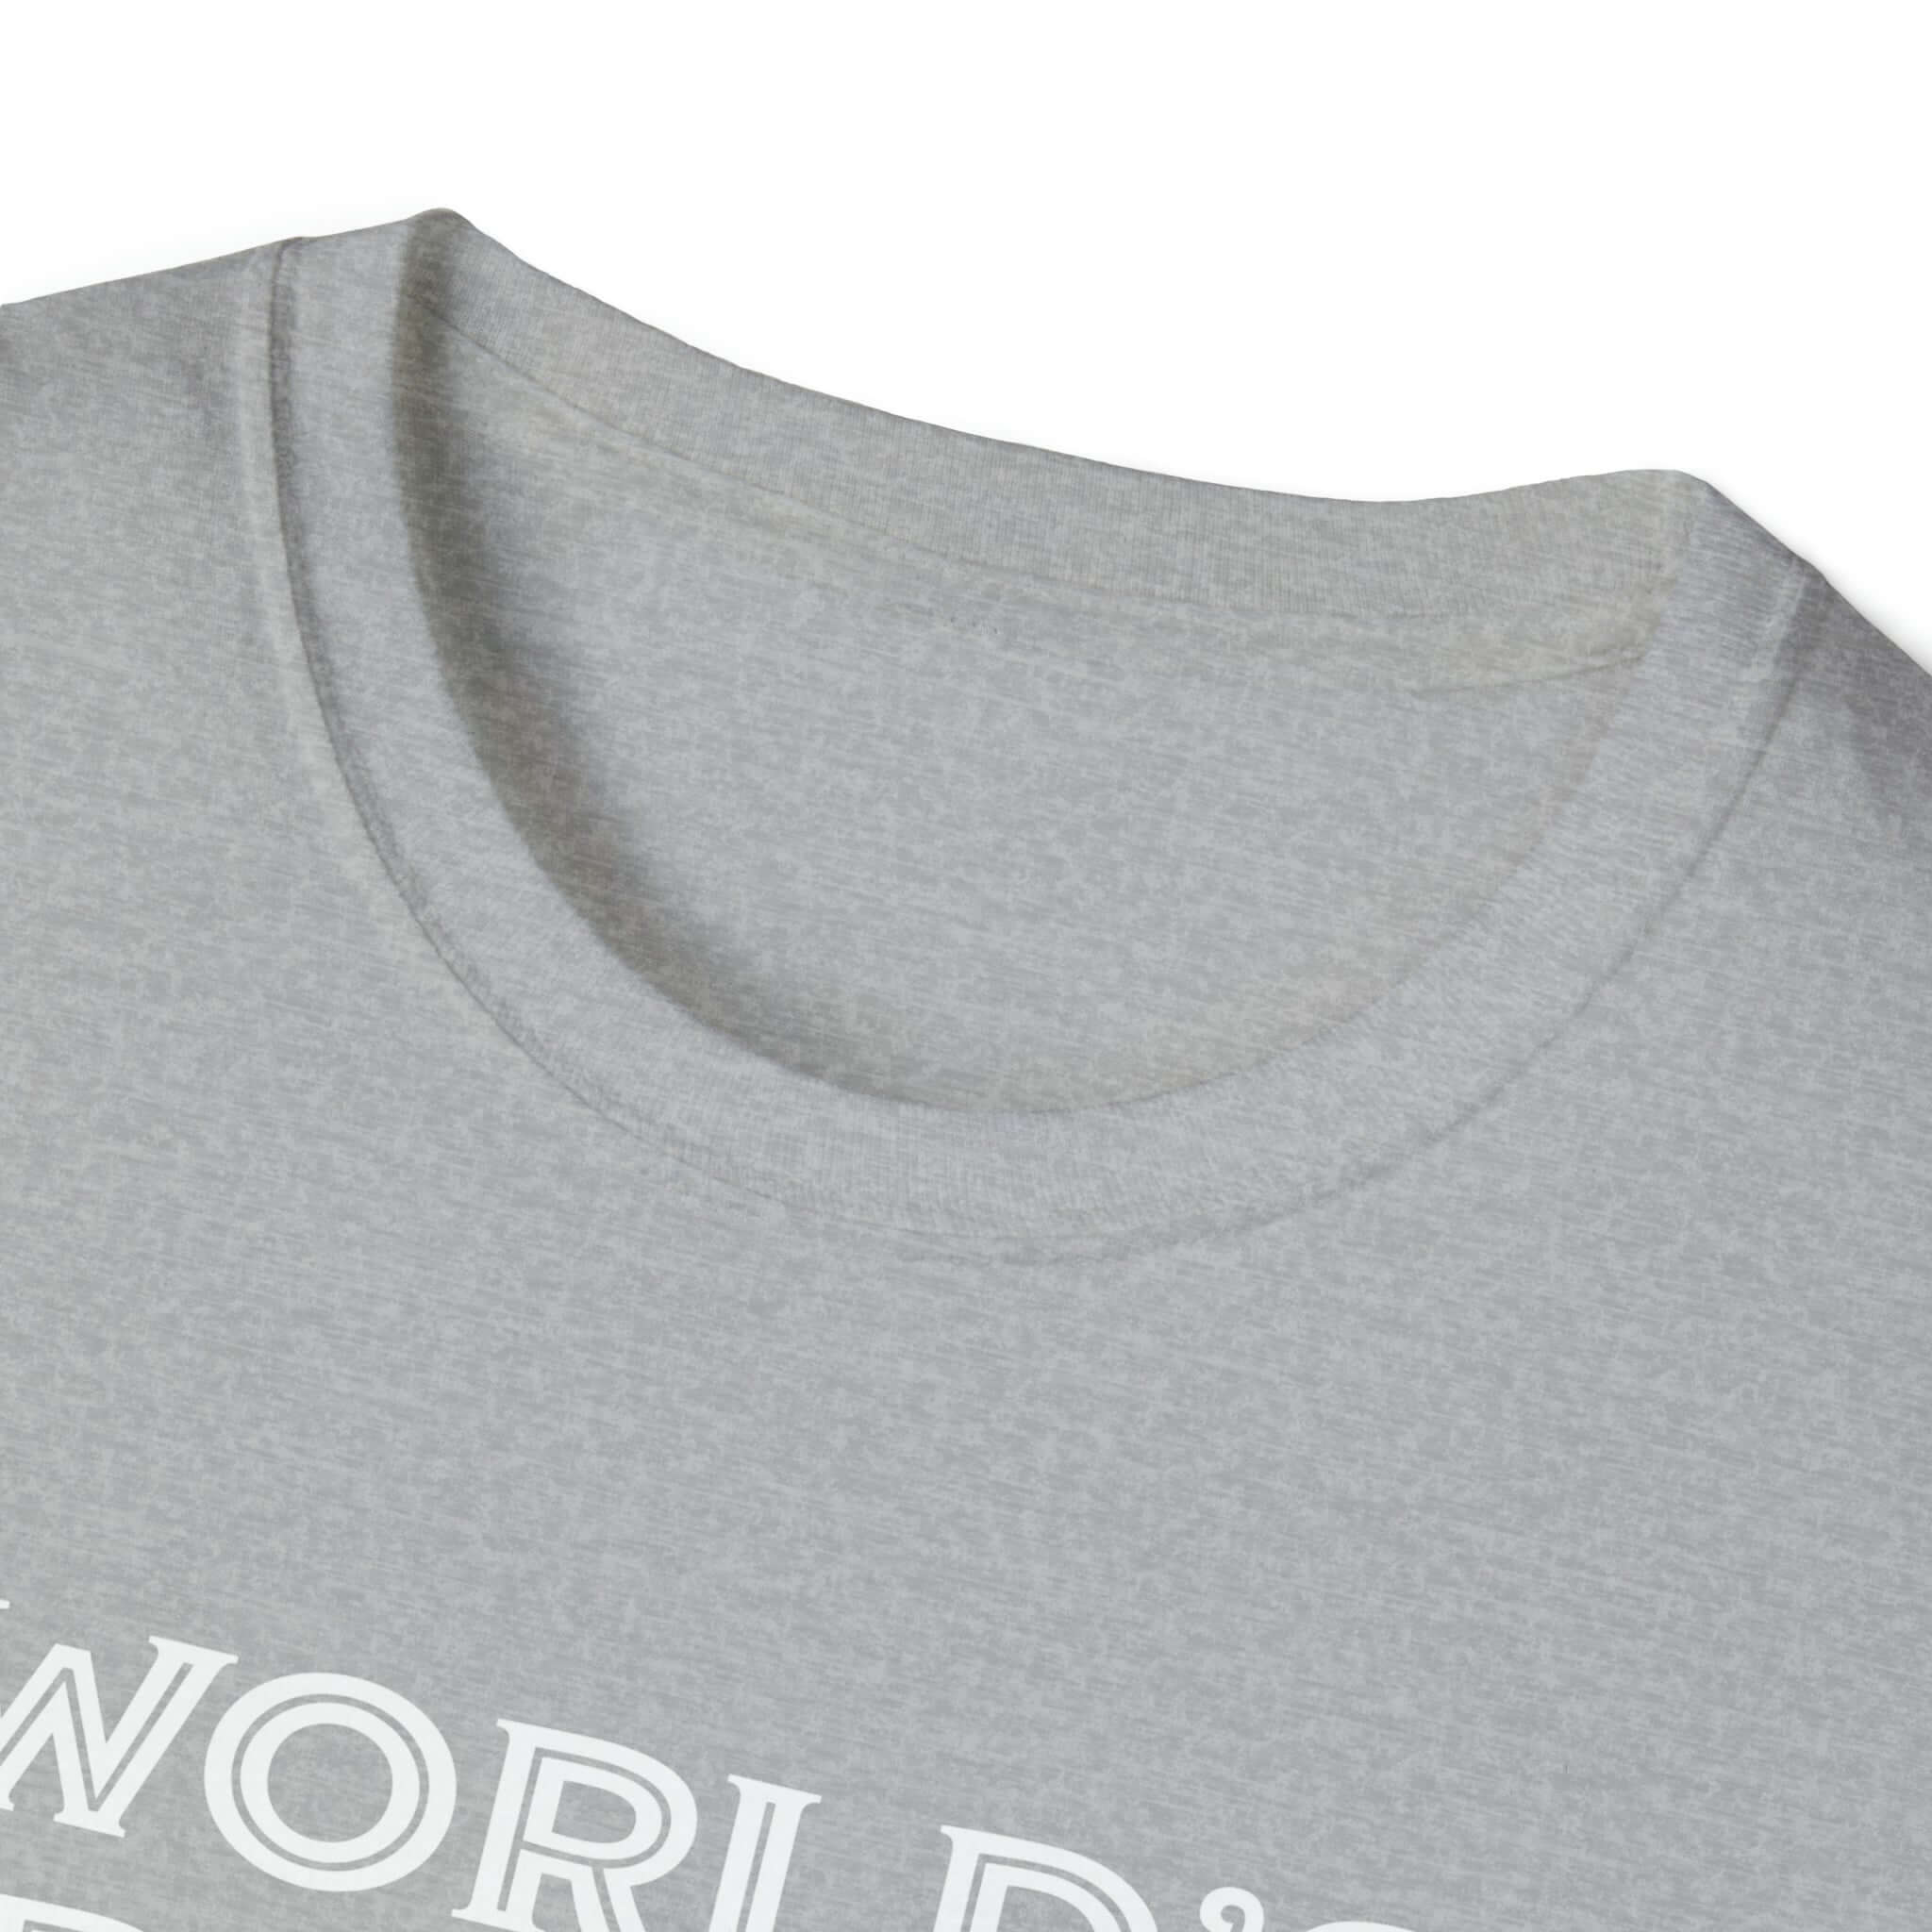 World's Greatest Player Softstyle T-Shirt